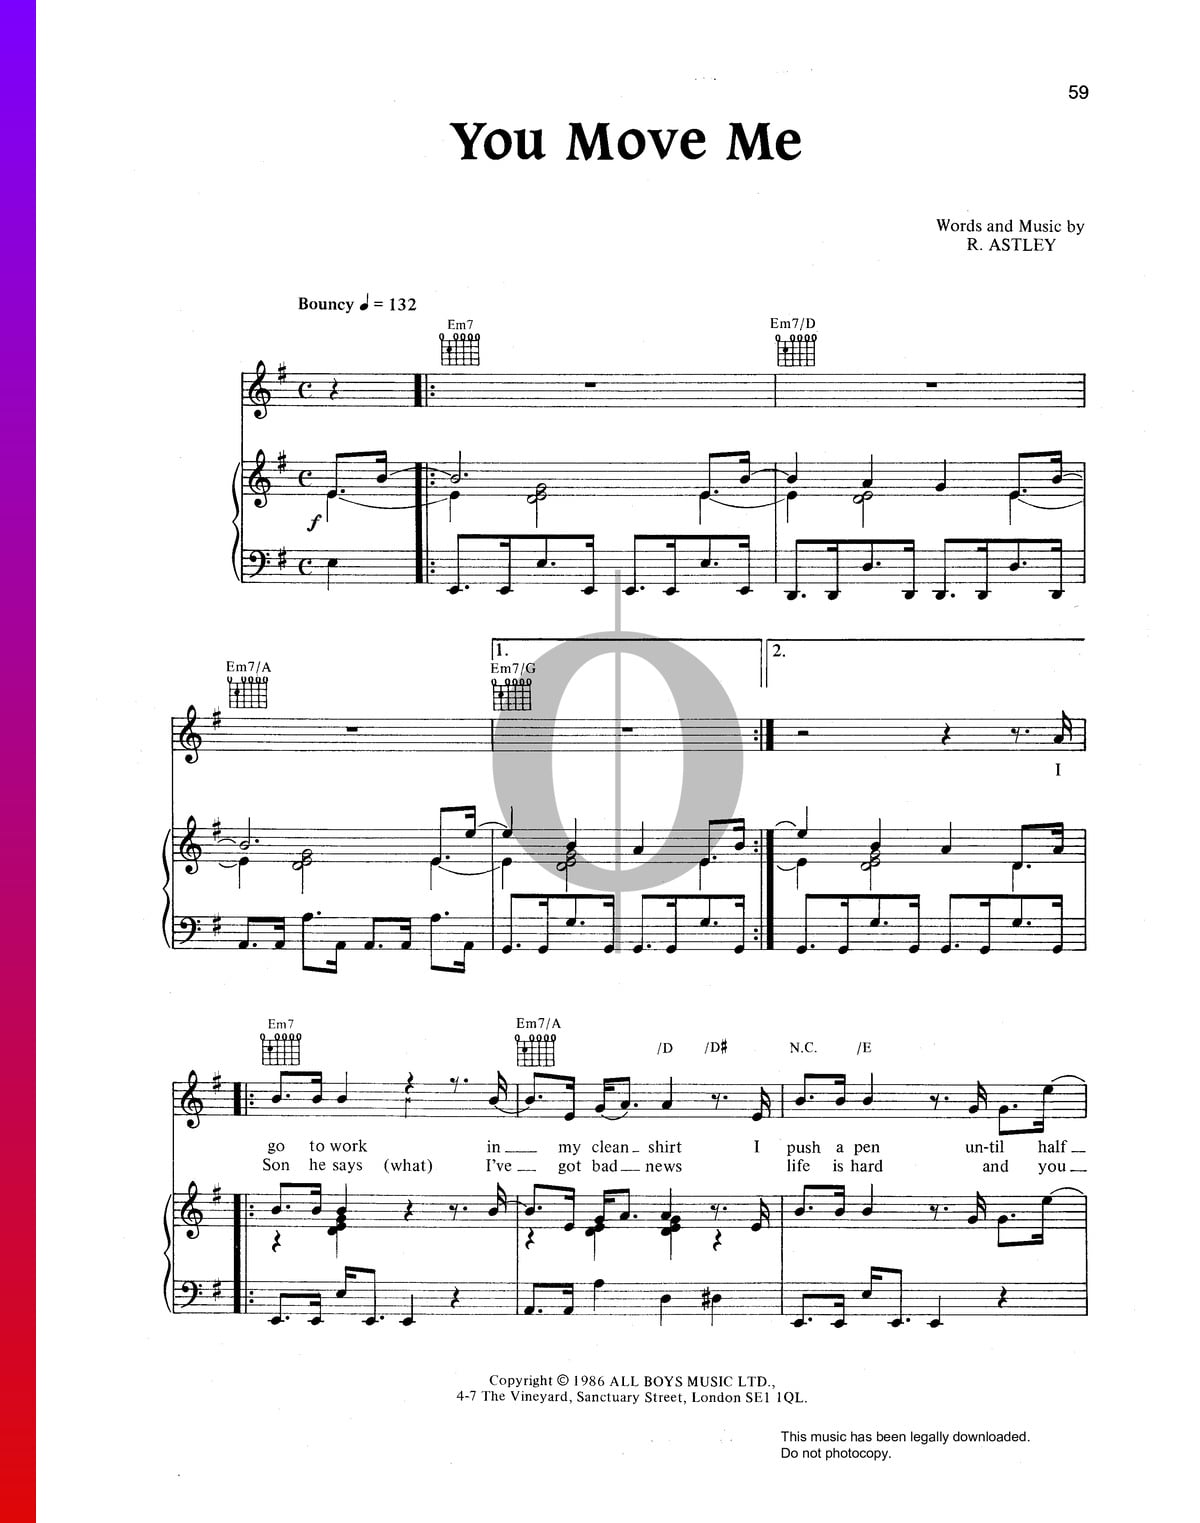 ▷ Everybody Wants To Rule The World Sheet Music (Piano, Guitar, Voice) -  OKTAV